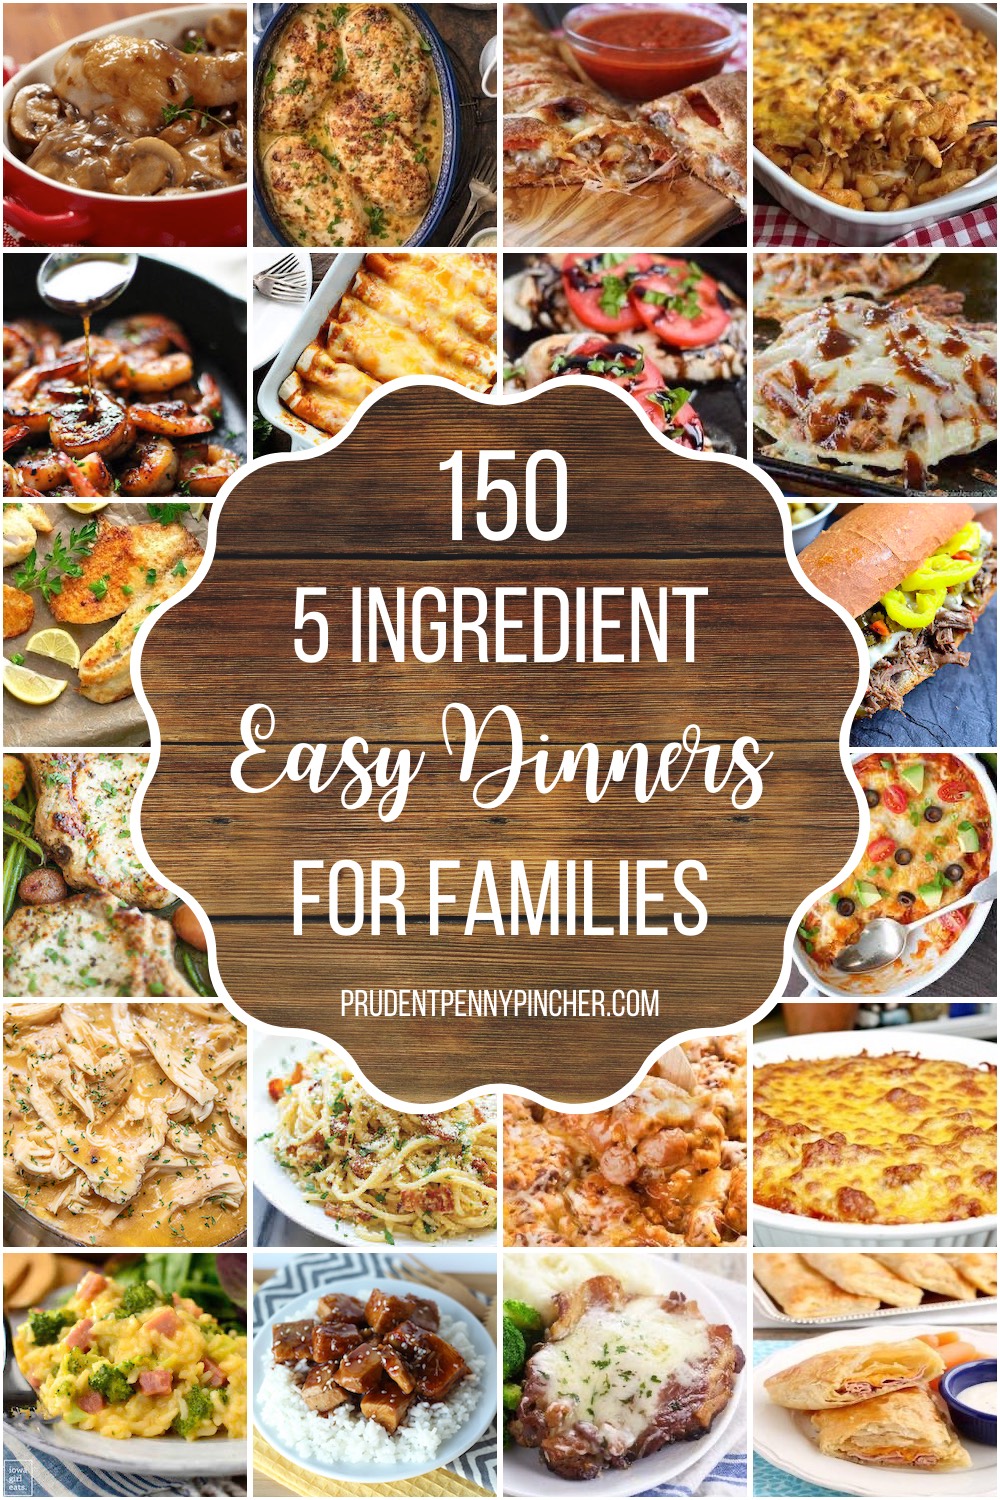 150-best-5-ingredient-easy-dinner-recipes-for-families-prudent-penny